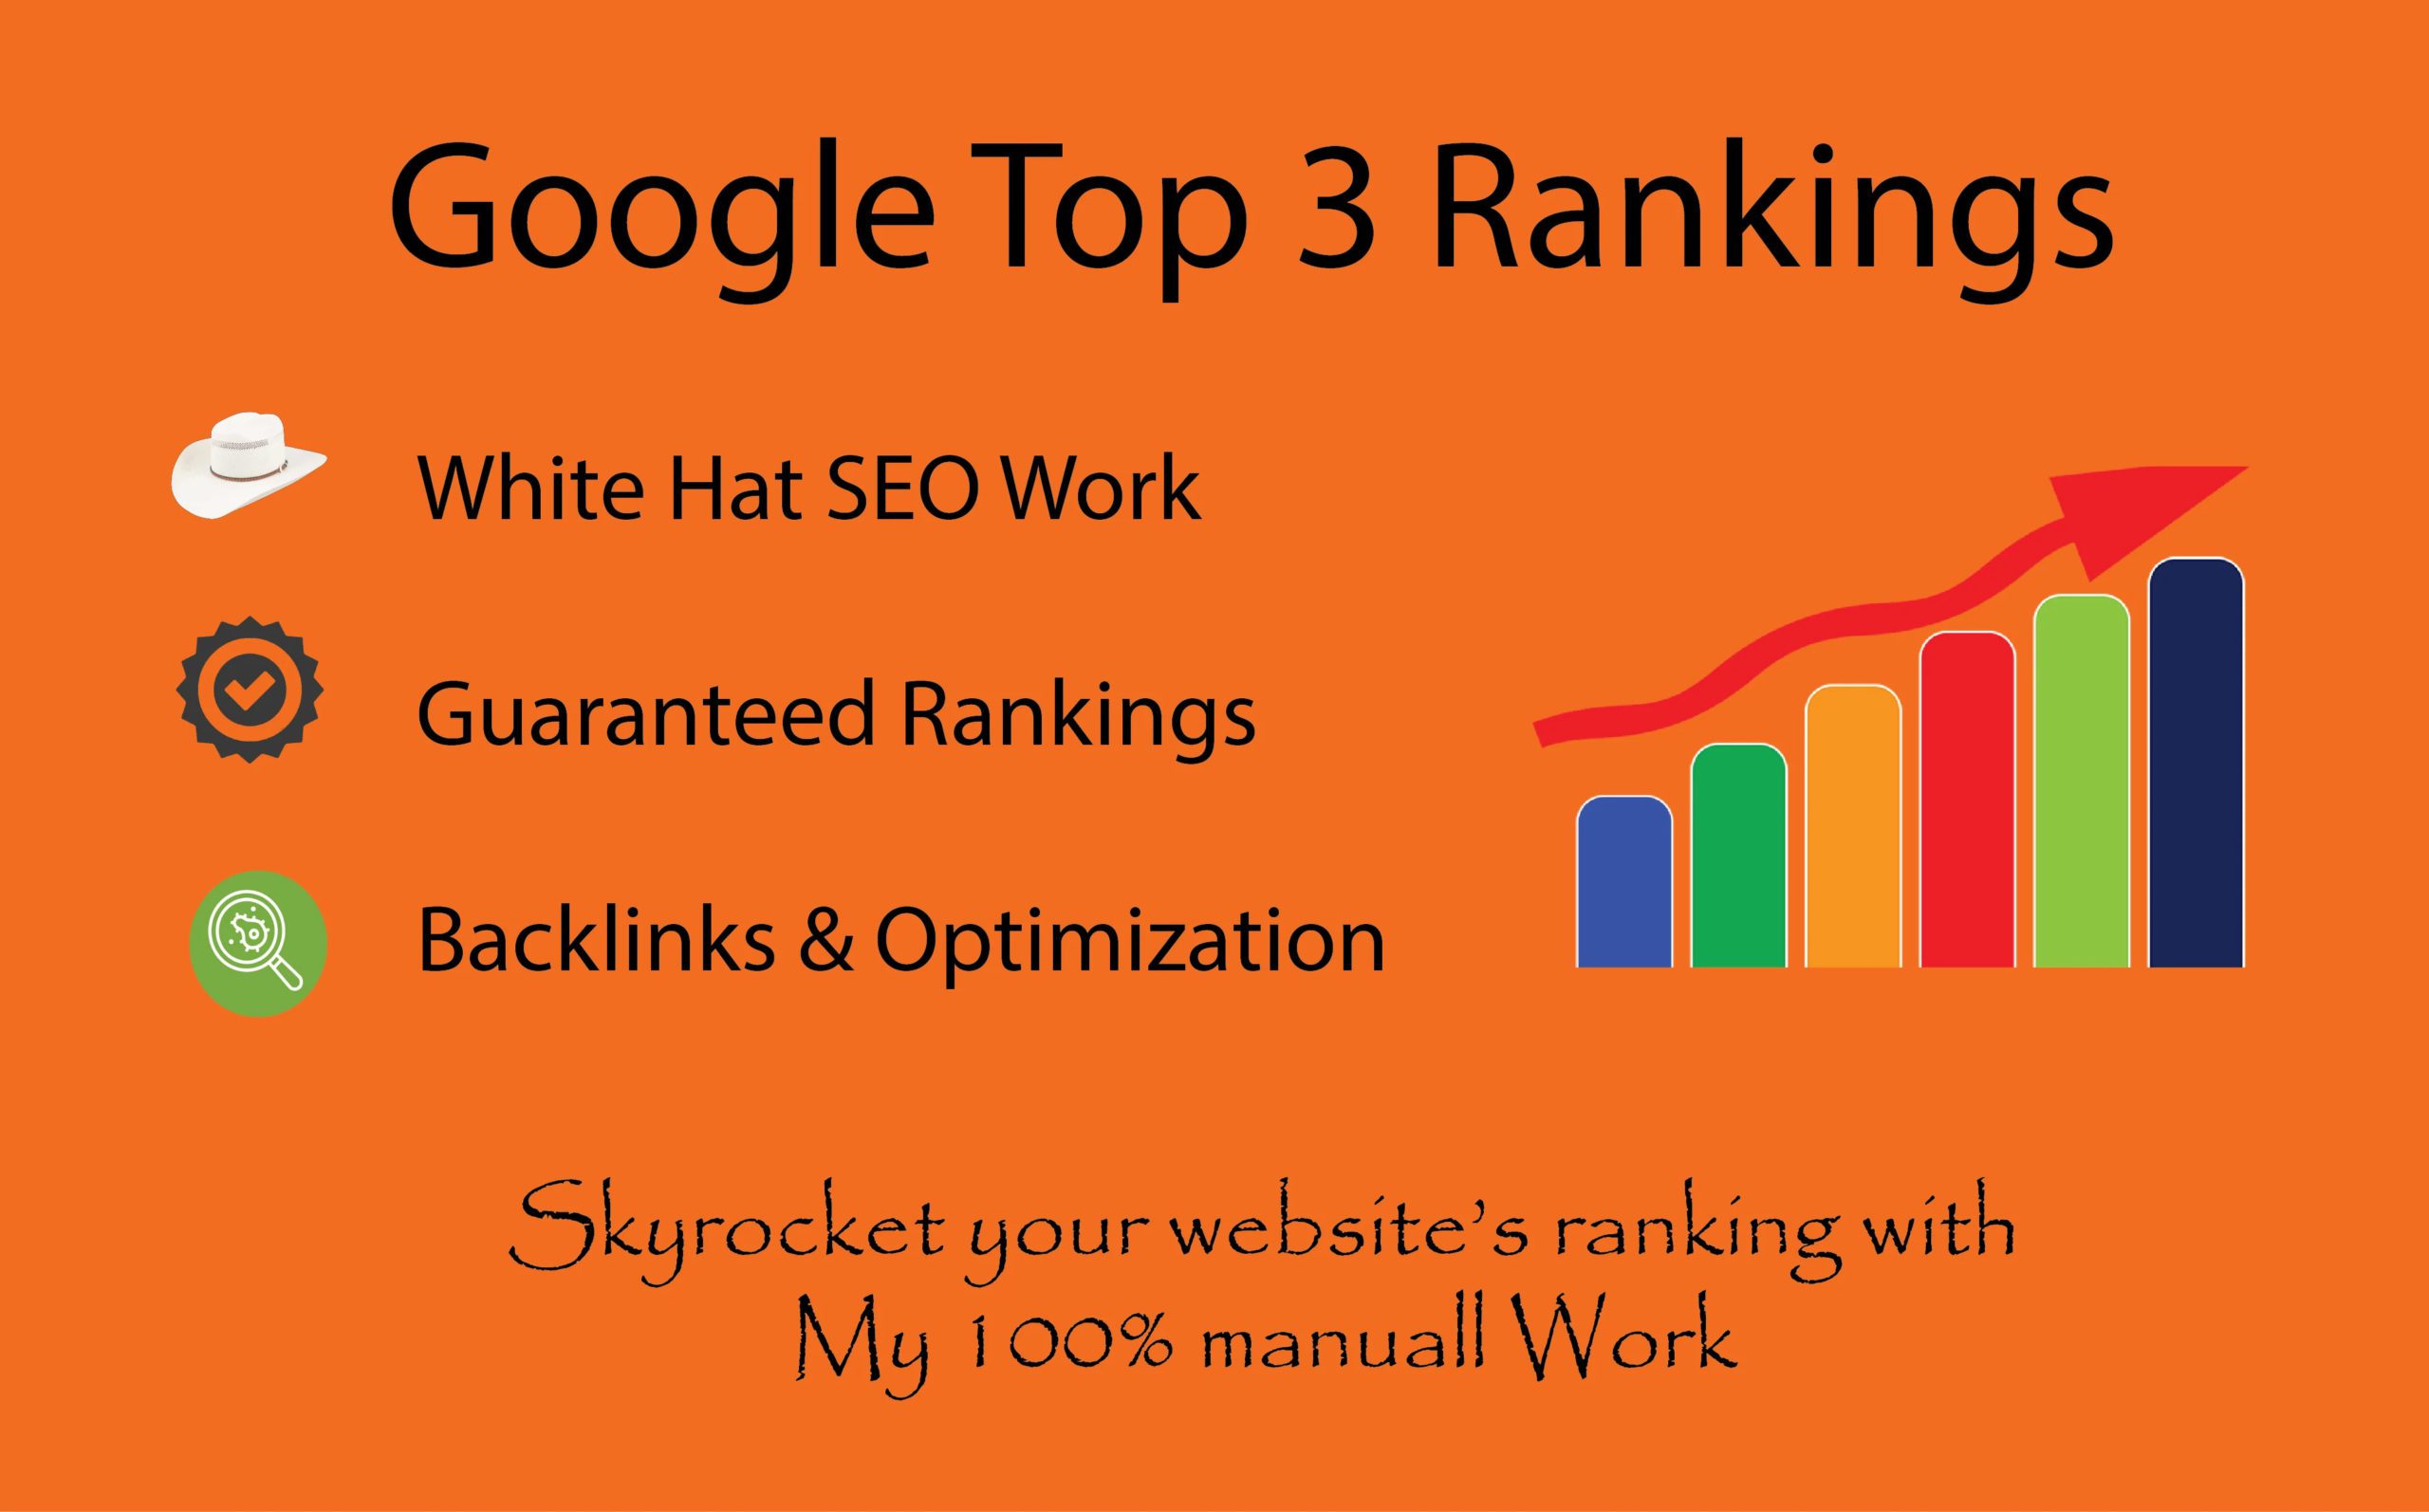 58401I will do SEO services for Google’s top 3 rankings